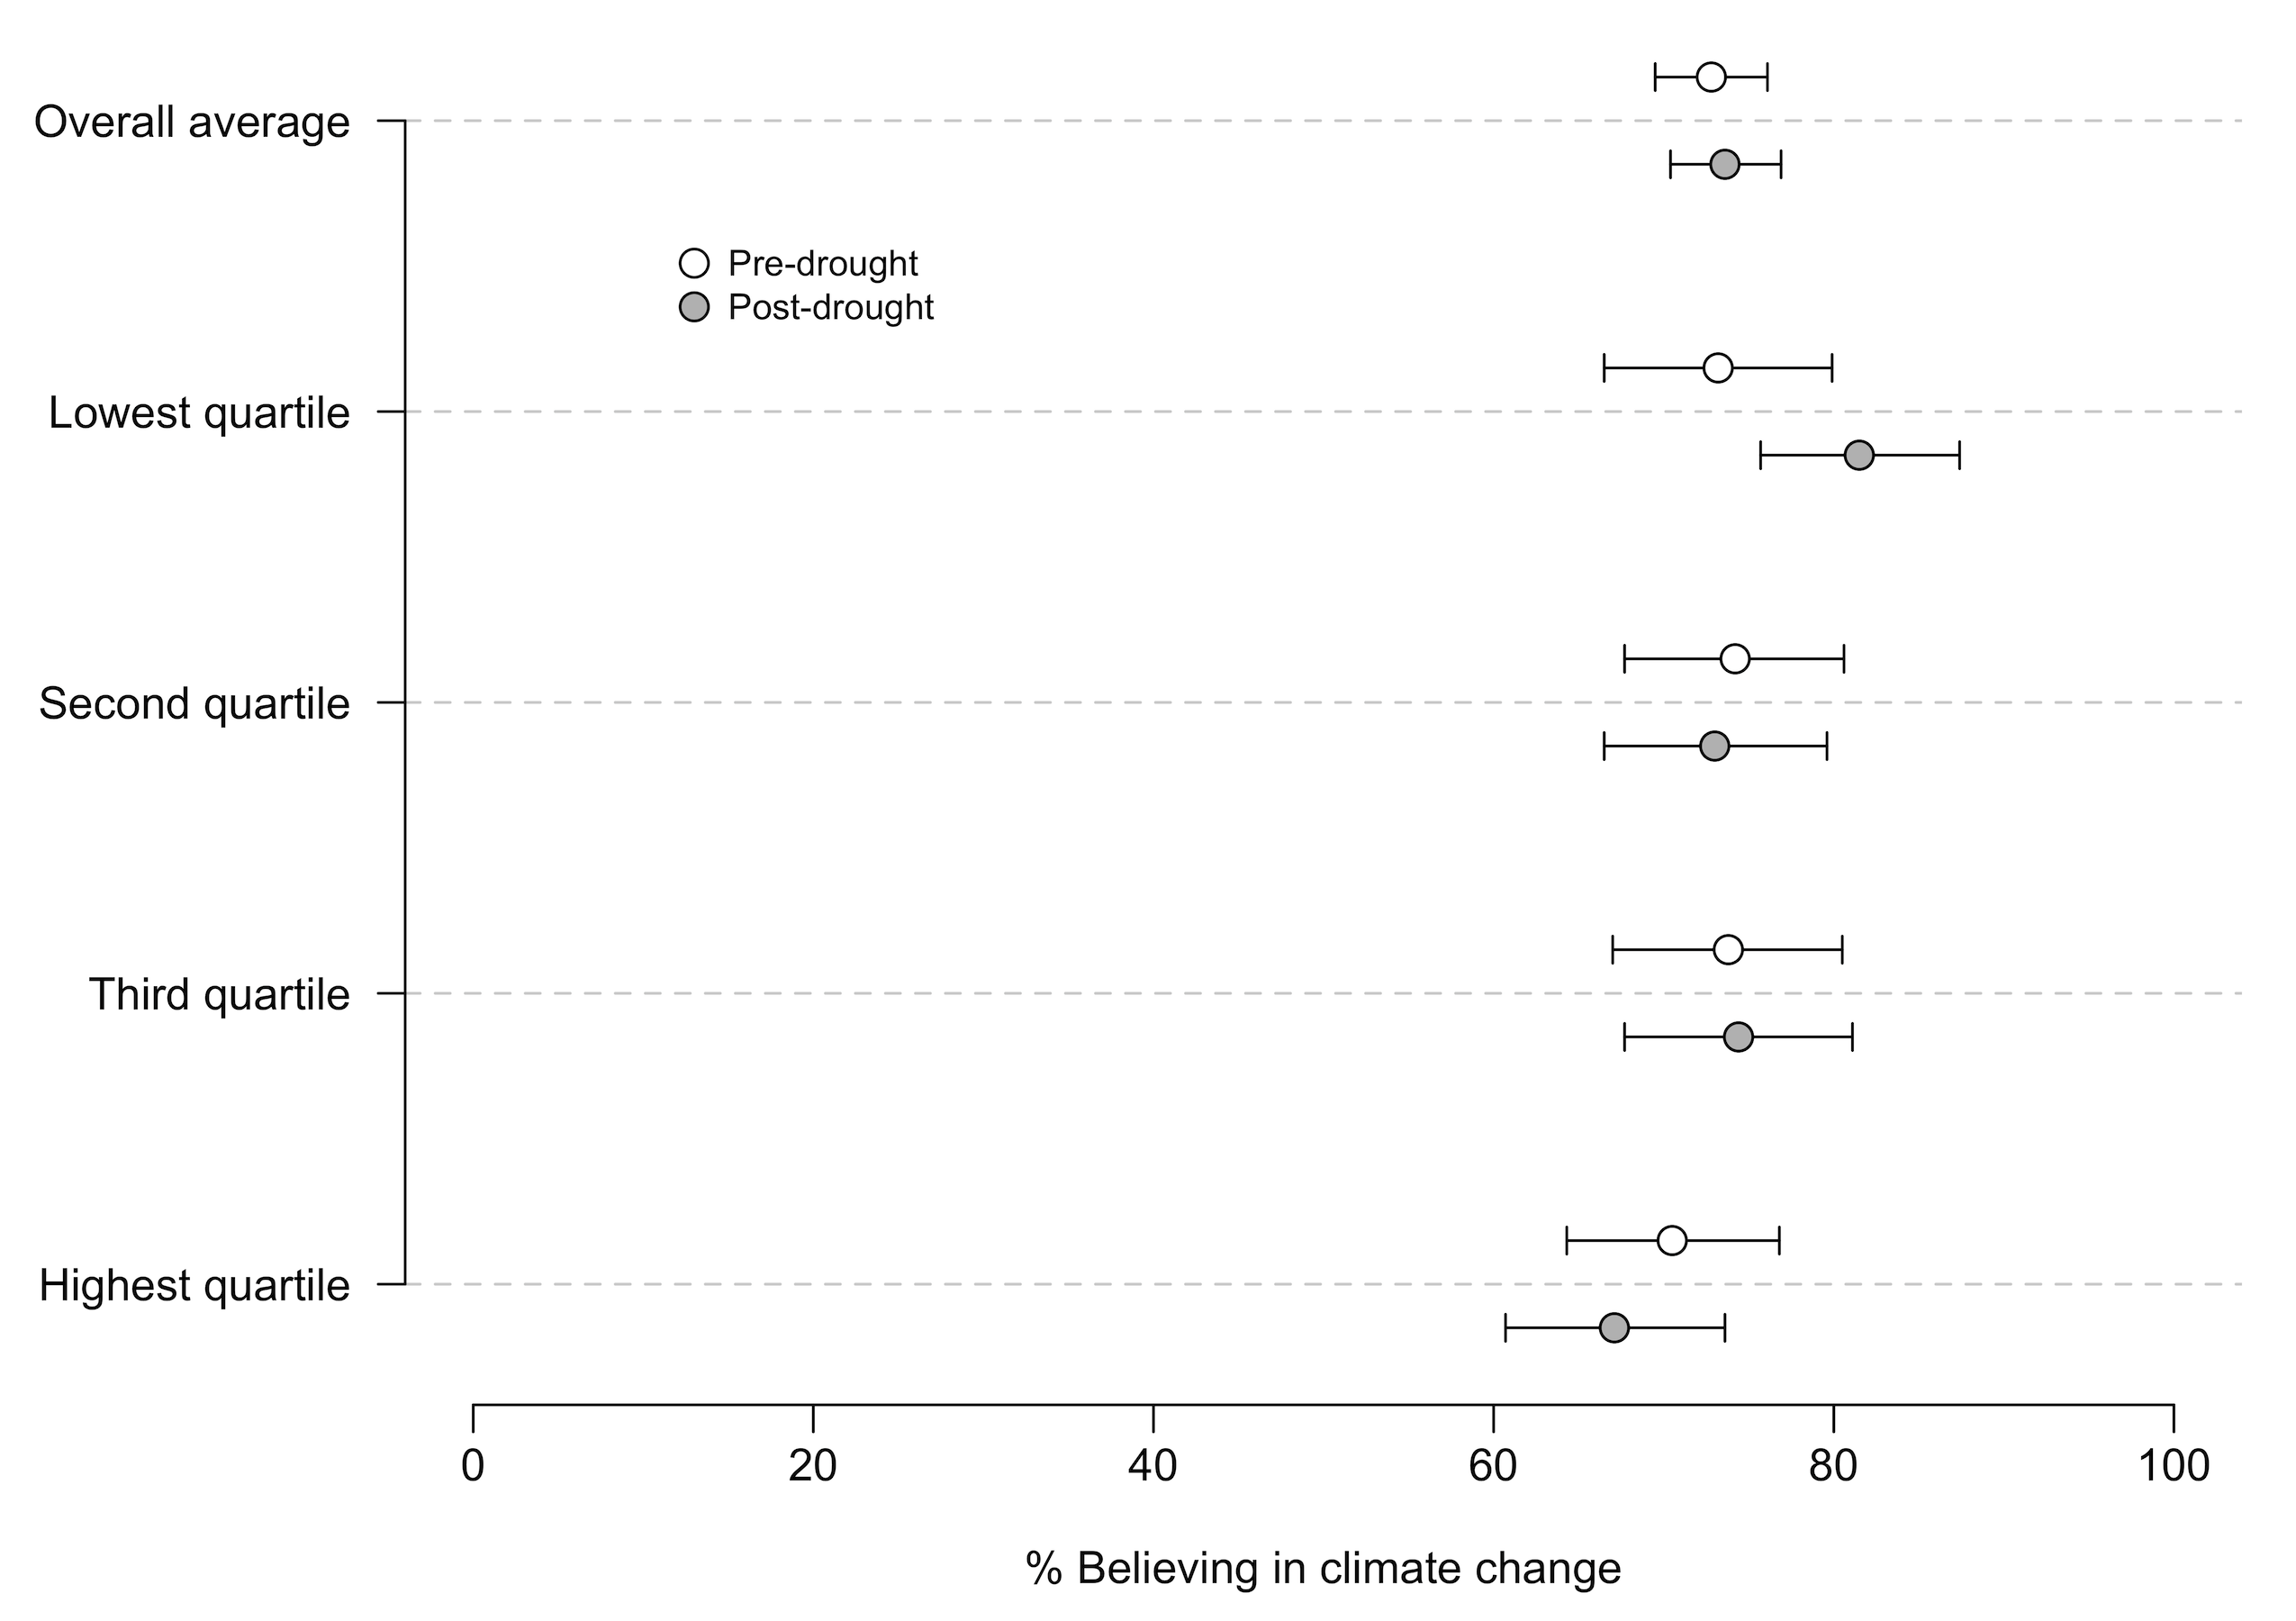 Dot plot comparing climate change beliefs with 95% confidence intervals